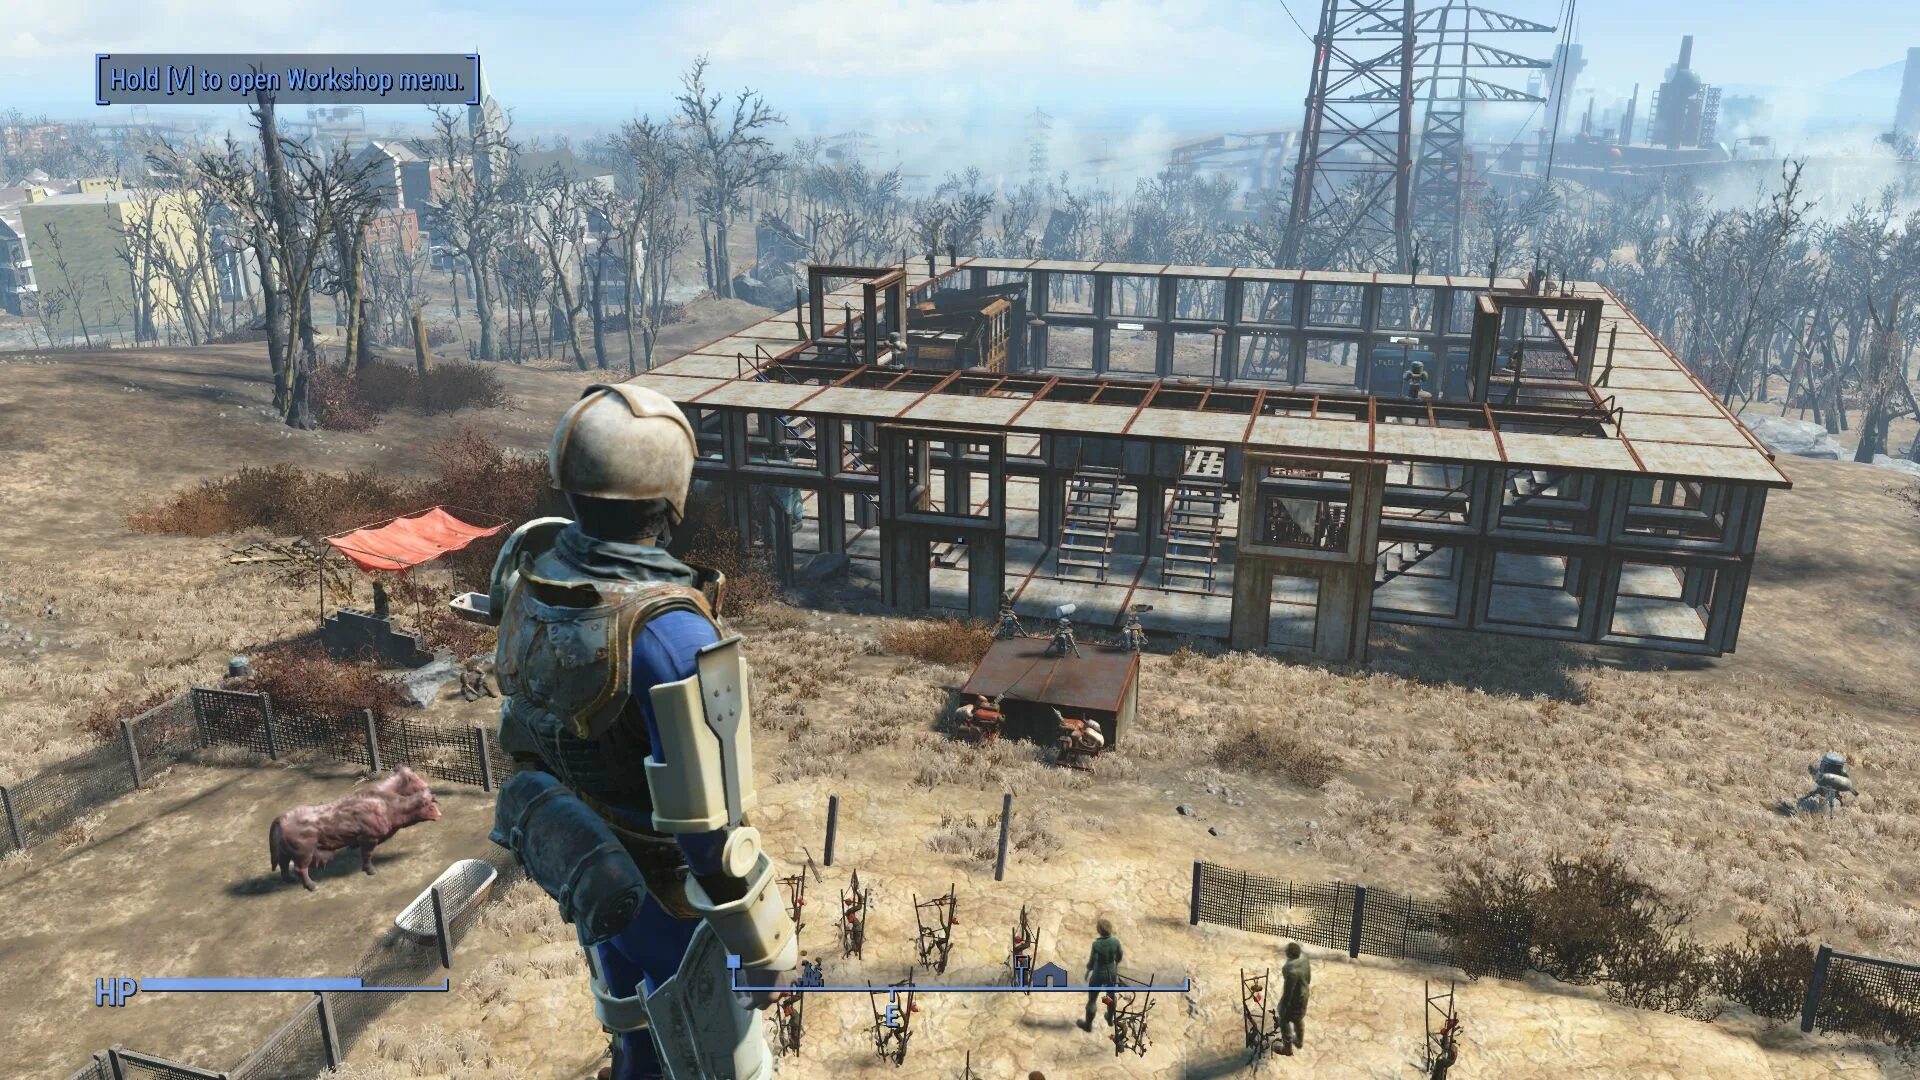 Фоллаут мастерские. Игра Fallout 4. Fallout 4 мастерская. Fallout 4 (2015). Игра ps4 Fallout 4.